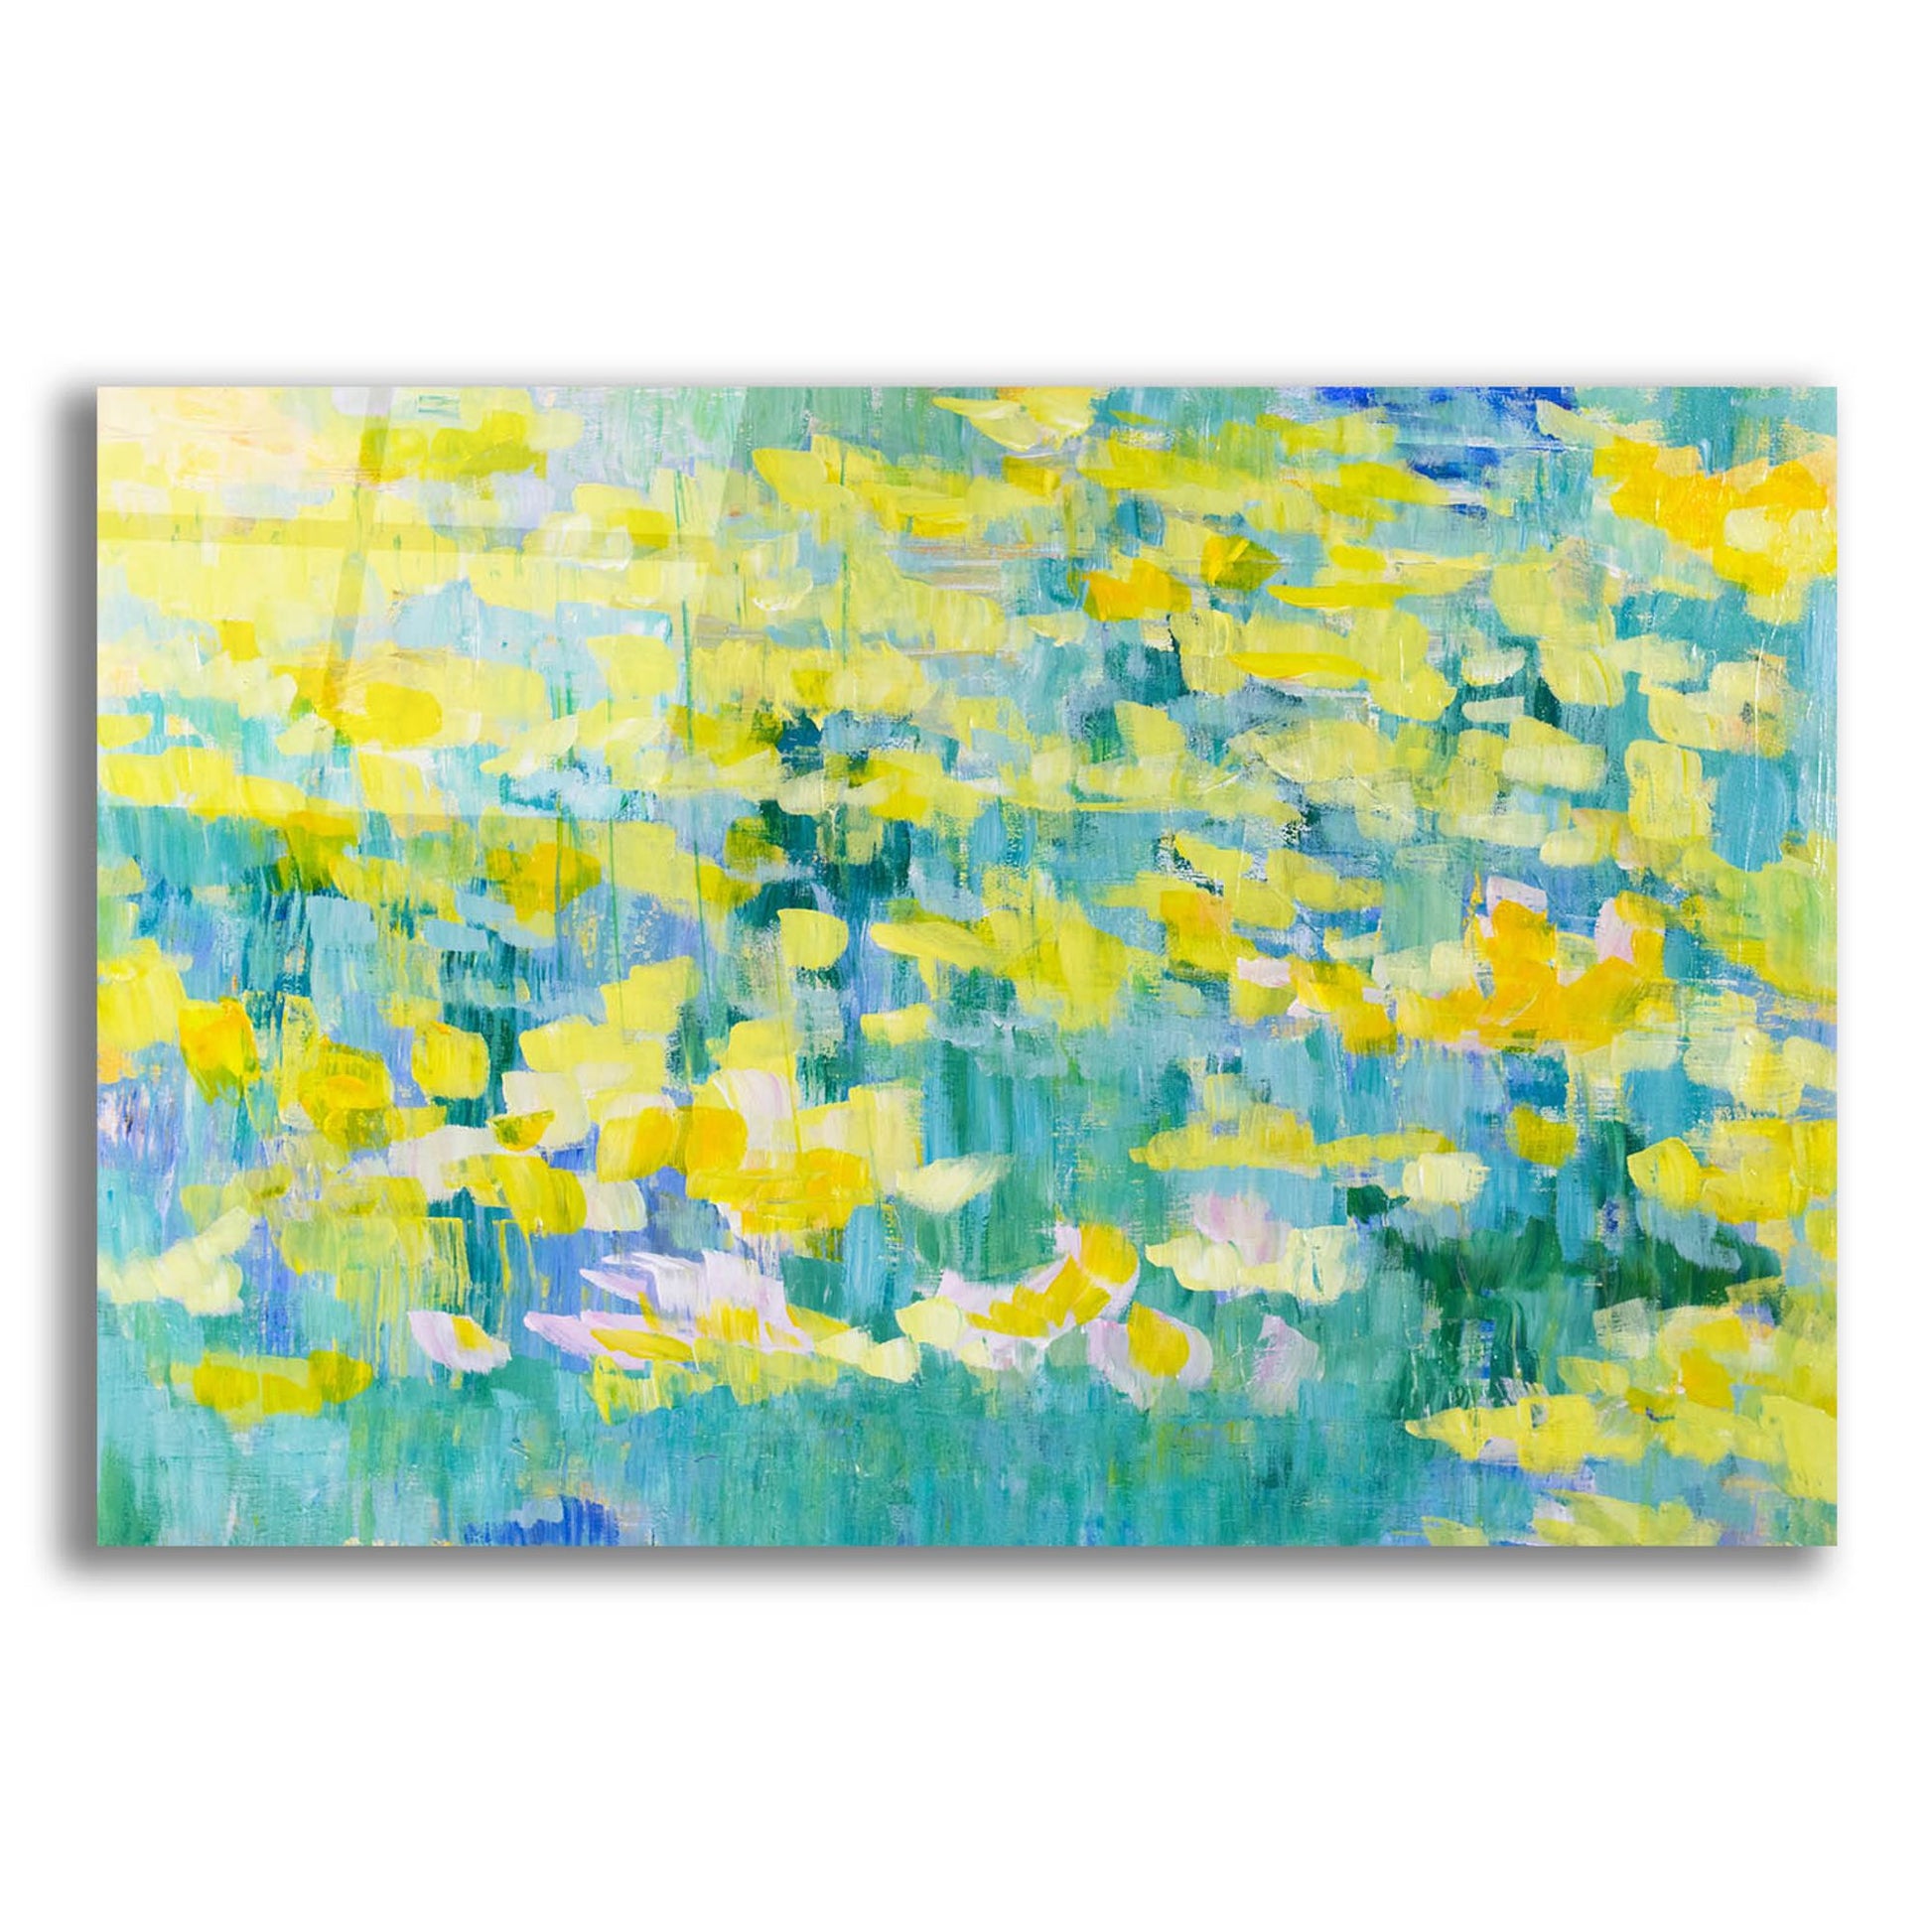 Epic Art 'And They Were All Yellow' by Cassandra Gillens, Acrylic Glass Wall Art,24x16